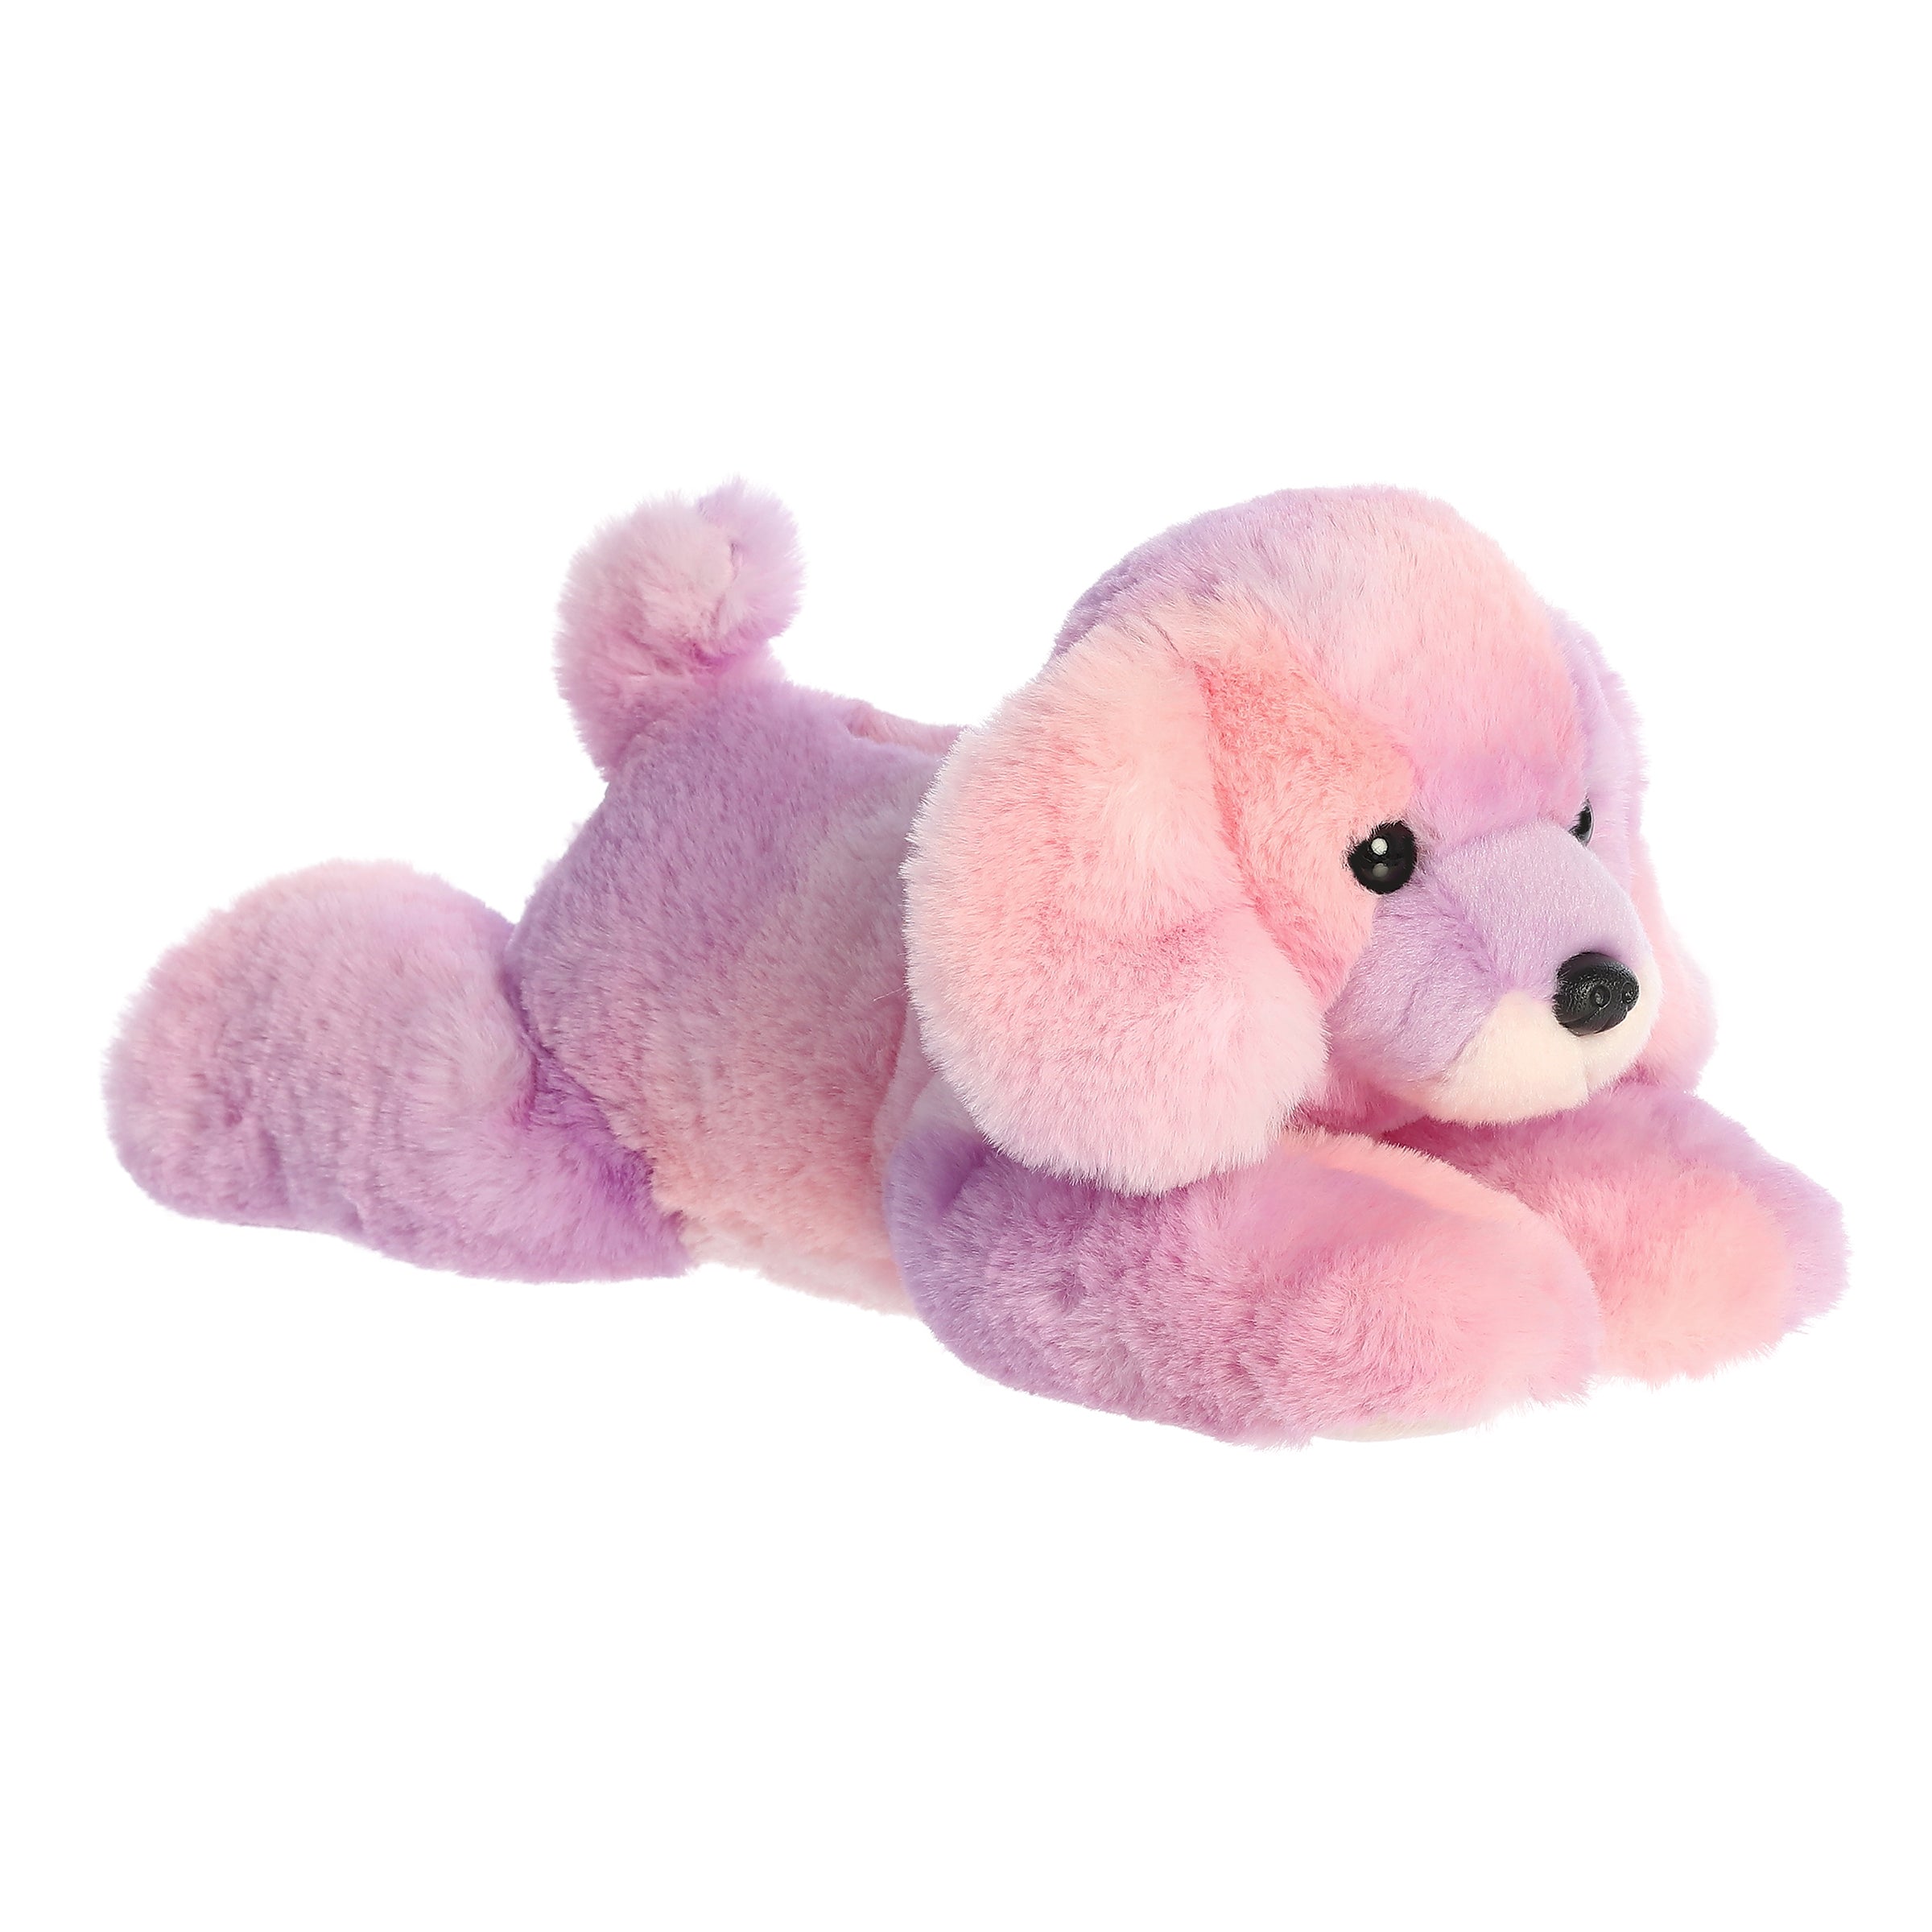 Bright pink and purple Paisley plushie pup, offering floppy ears and a colorful, cuddly charm for whimsical adventures.